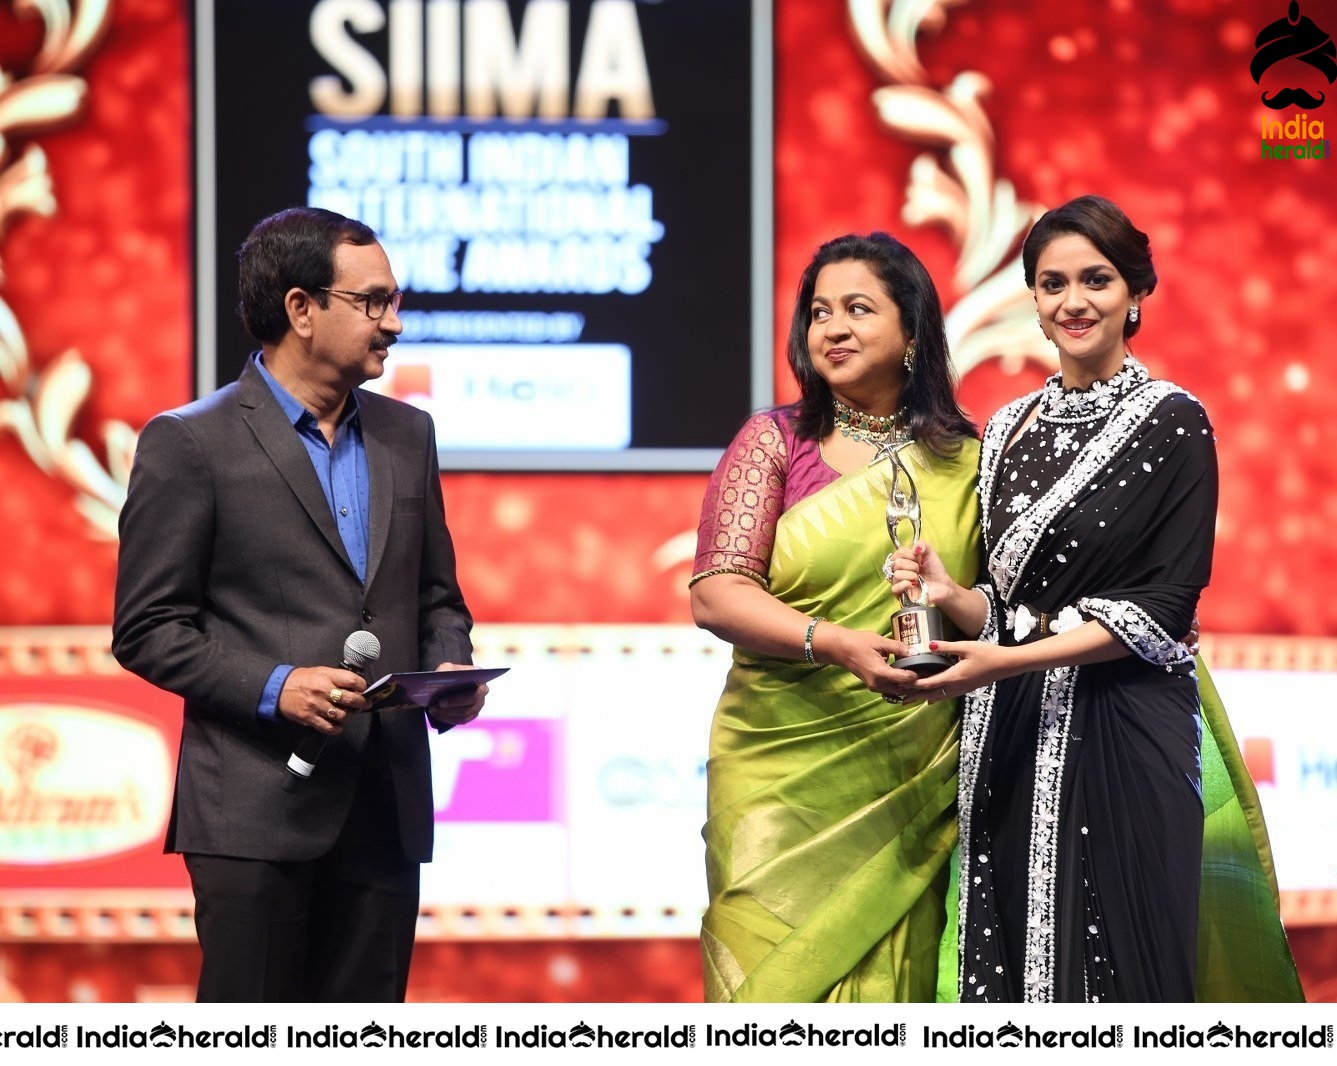 Rare and Unseen Photos from SIIMA Awards as a throwback Set 2